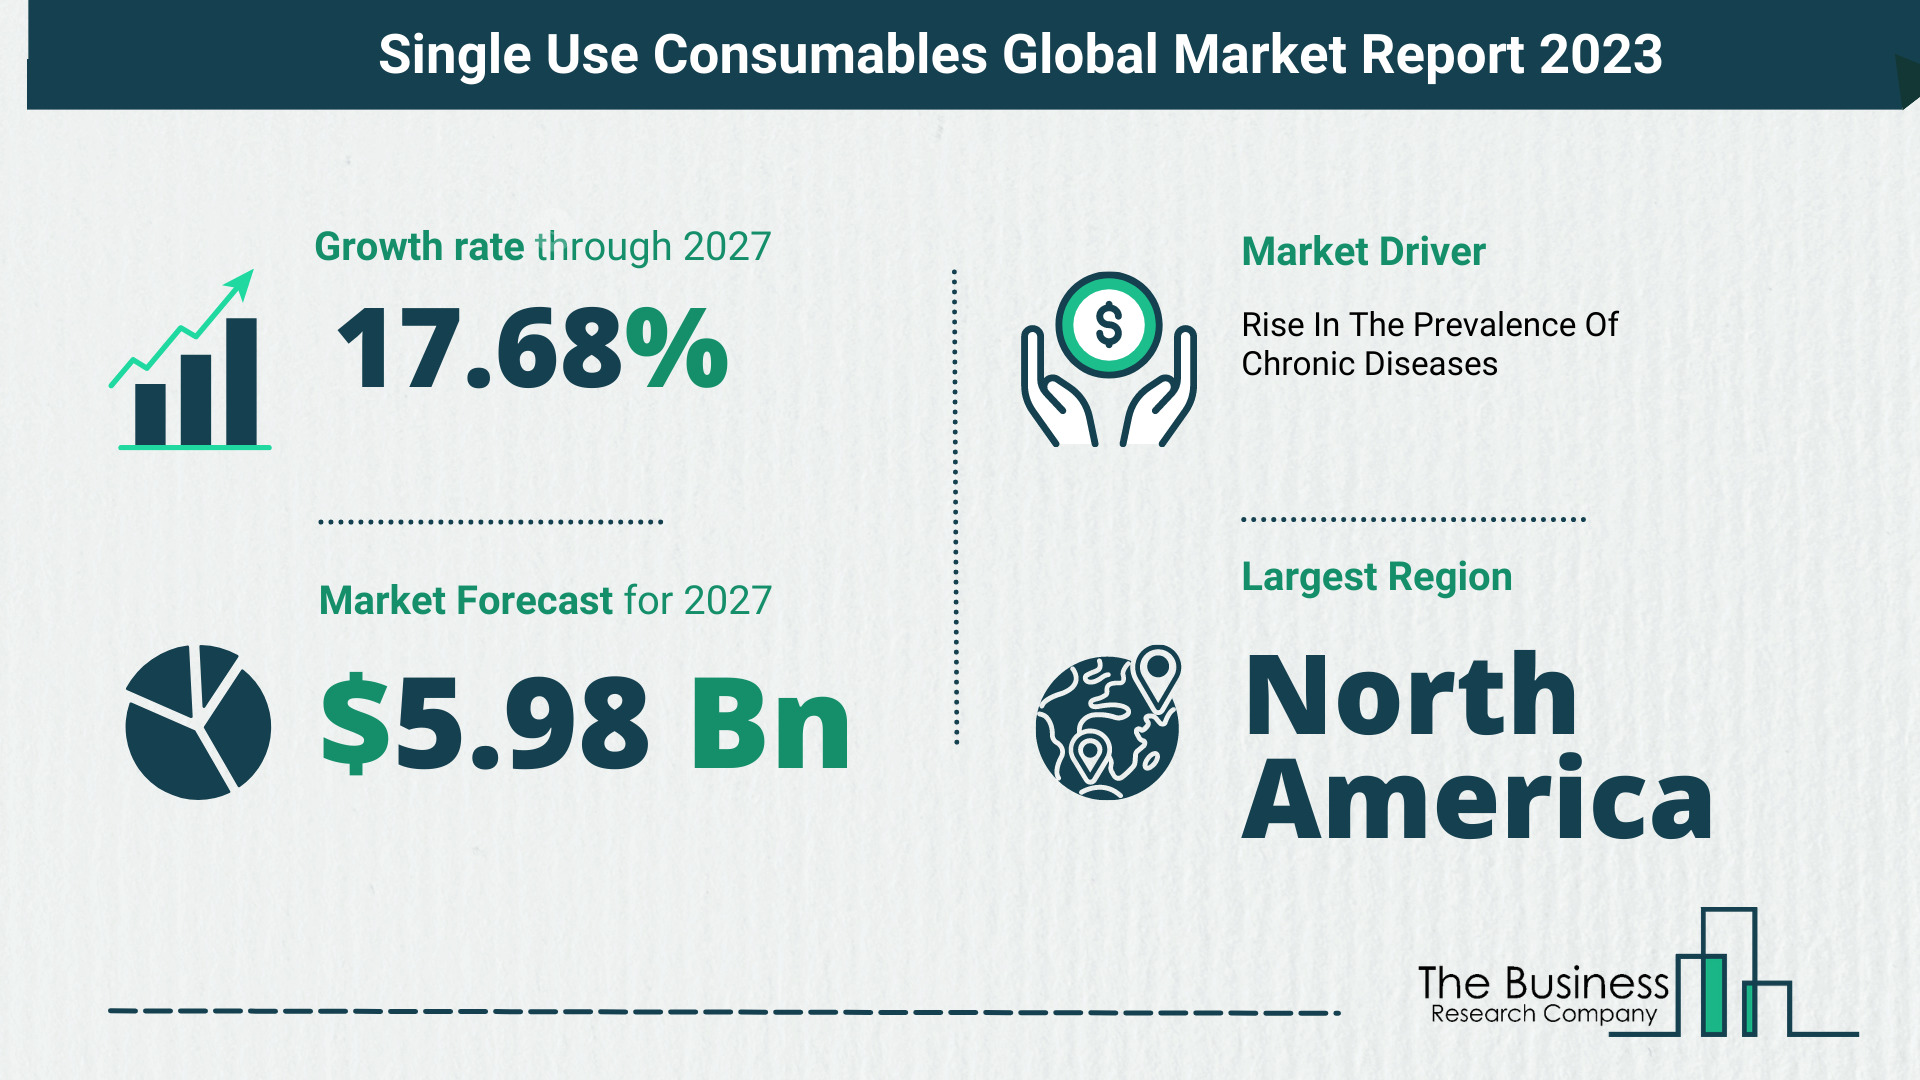 Single Use Consumables Market Size, Share, And Growth Rate Analysis 2023